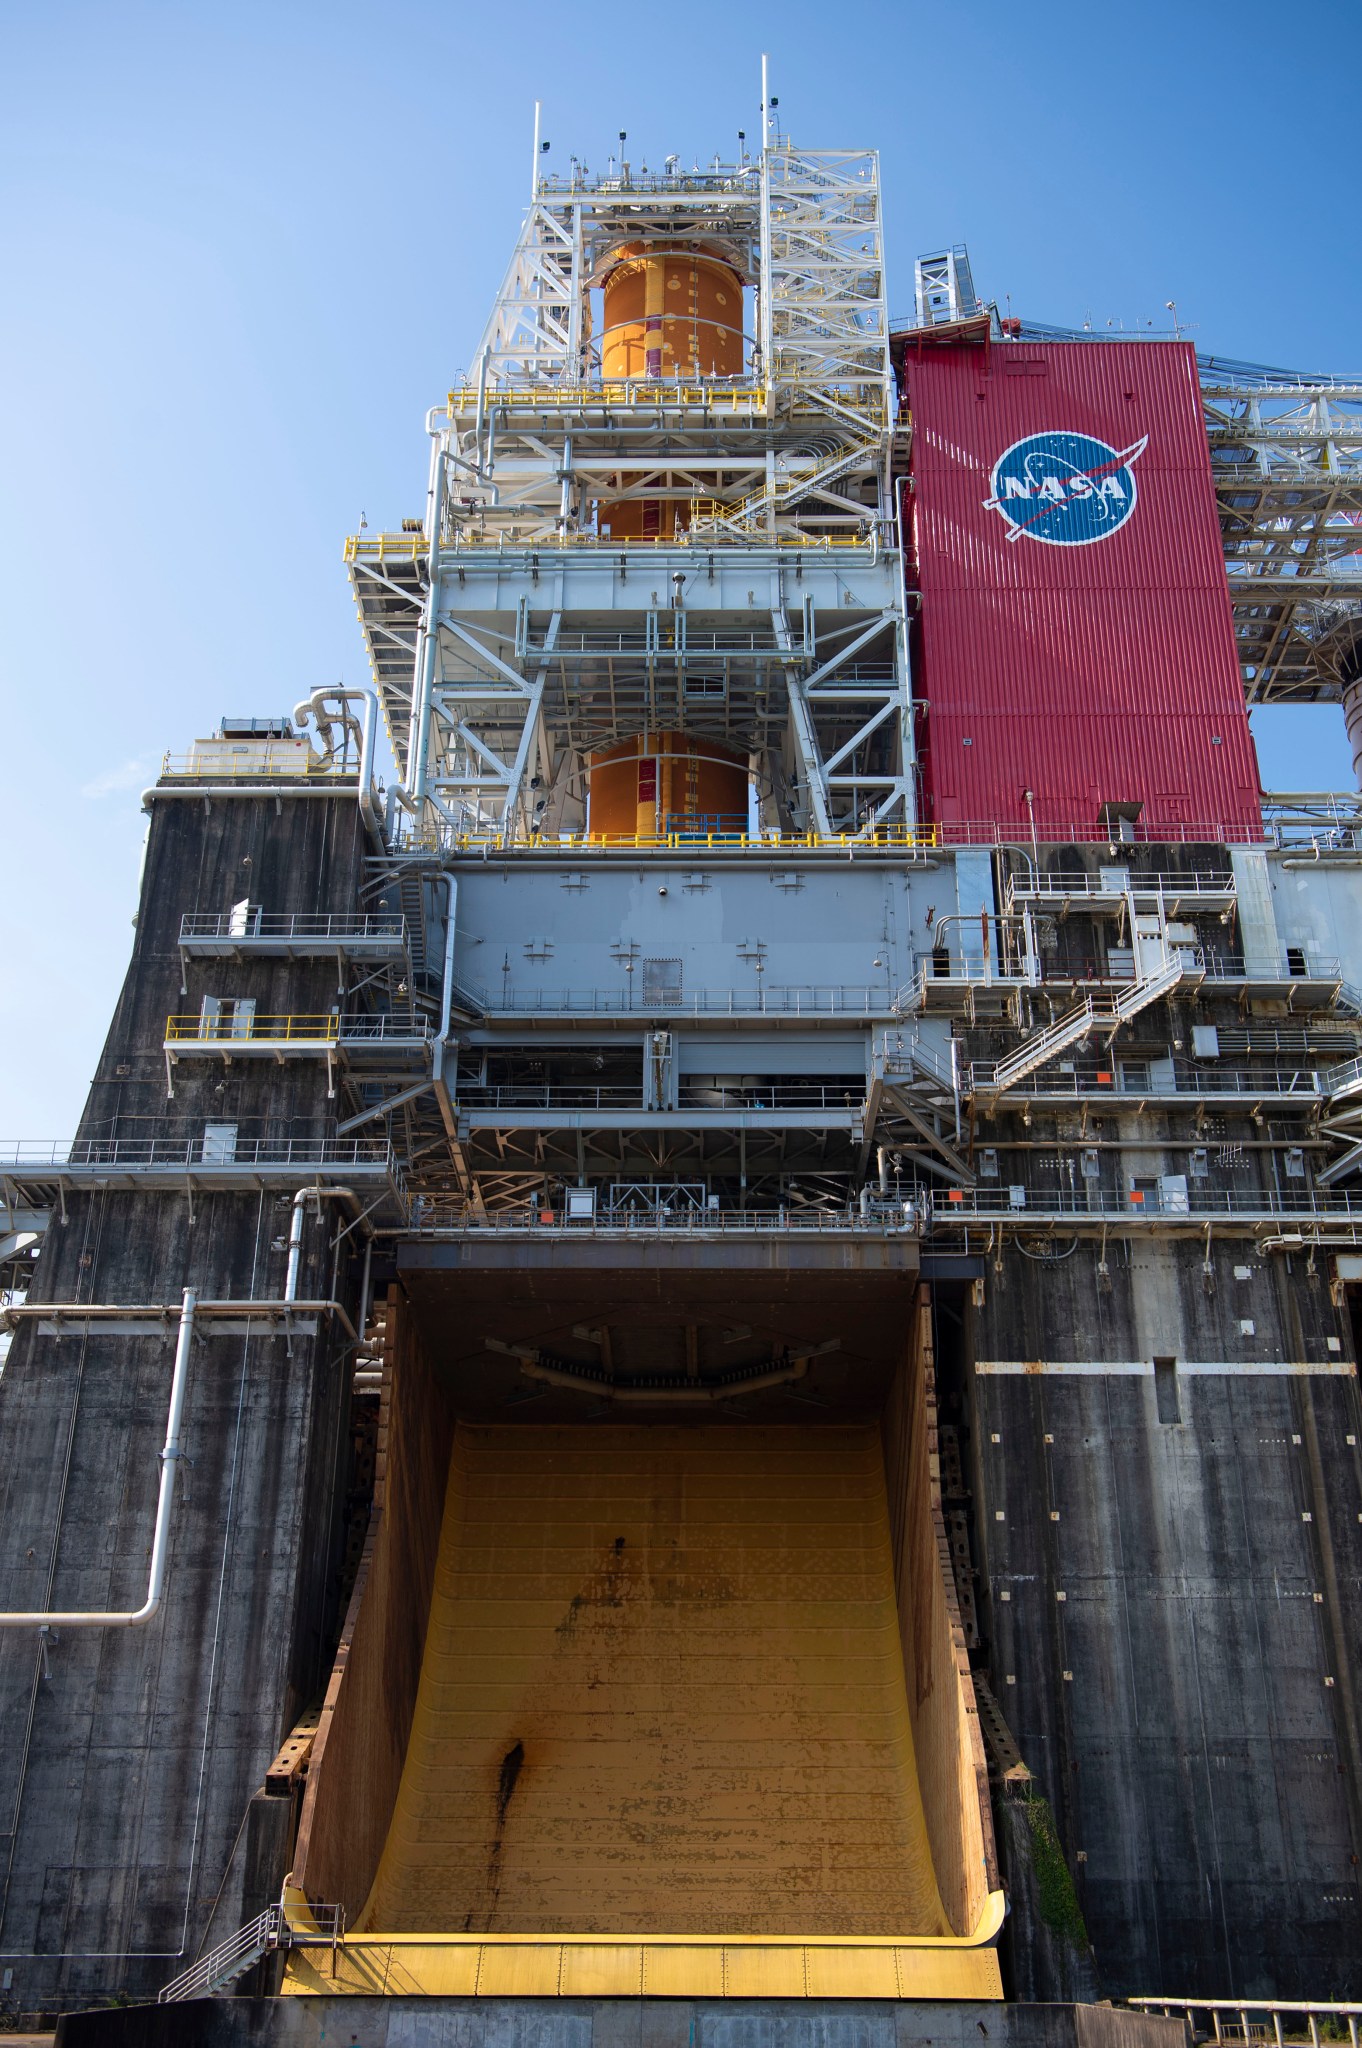 NASA is reviewing the performance of a valve on the core stage of its Space Launch System rocket.